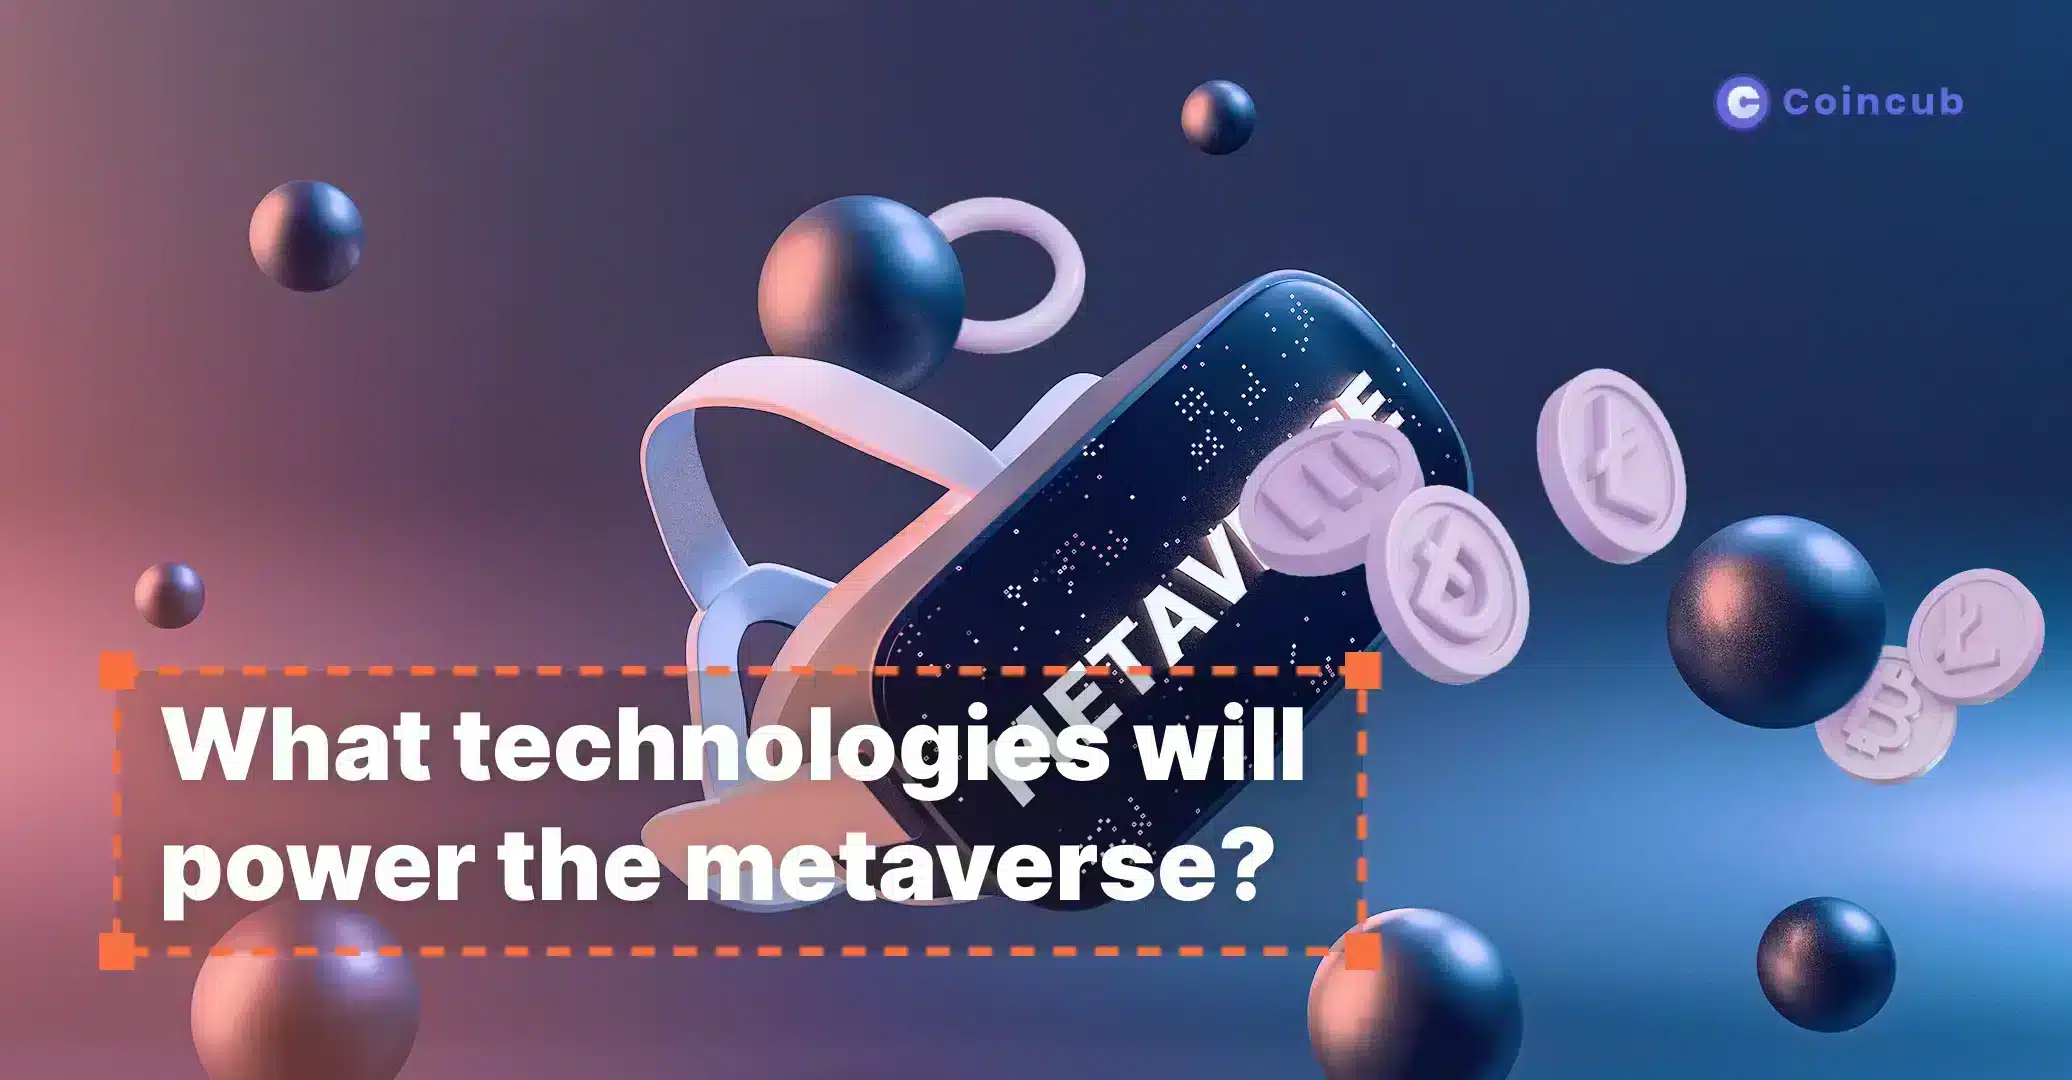 Exploring the technologies that will power the metaverse